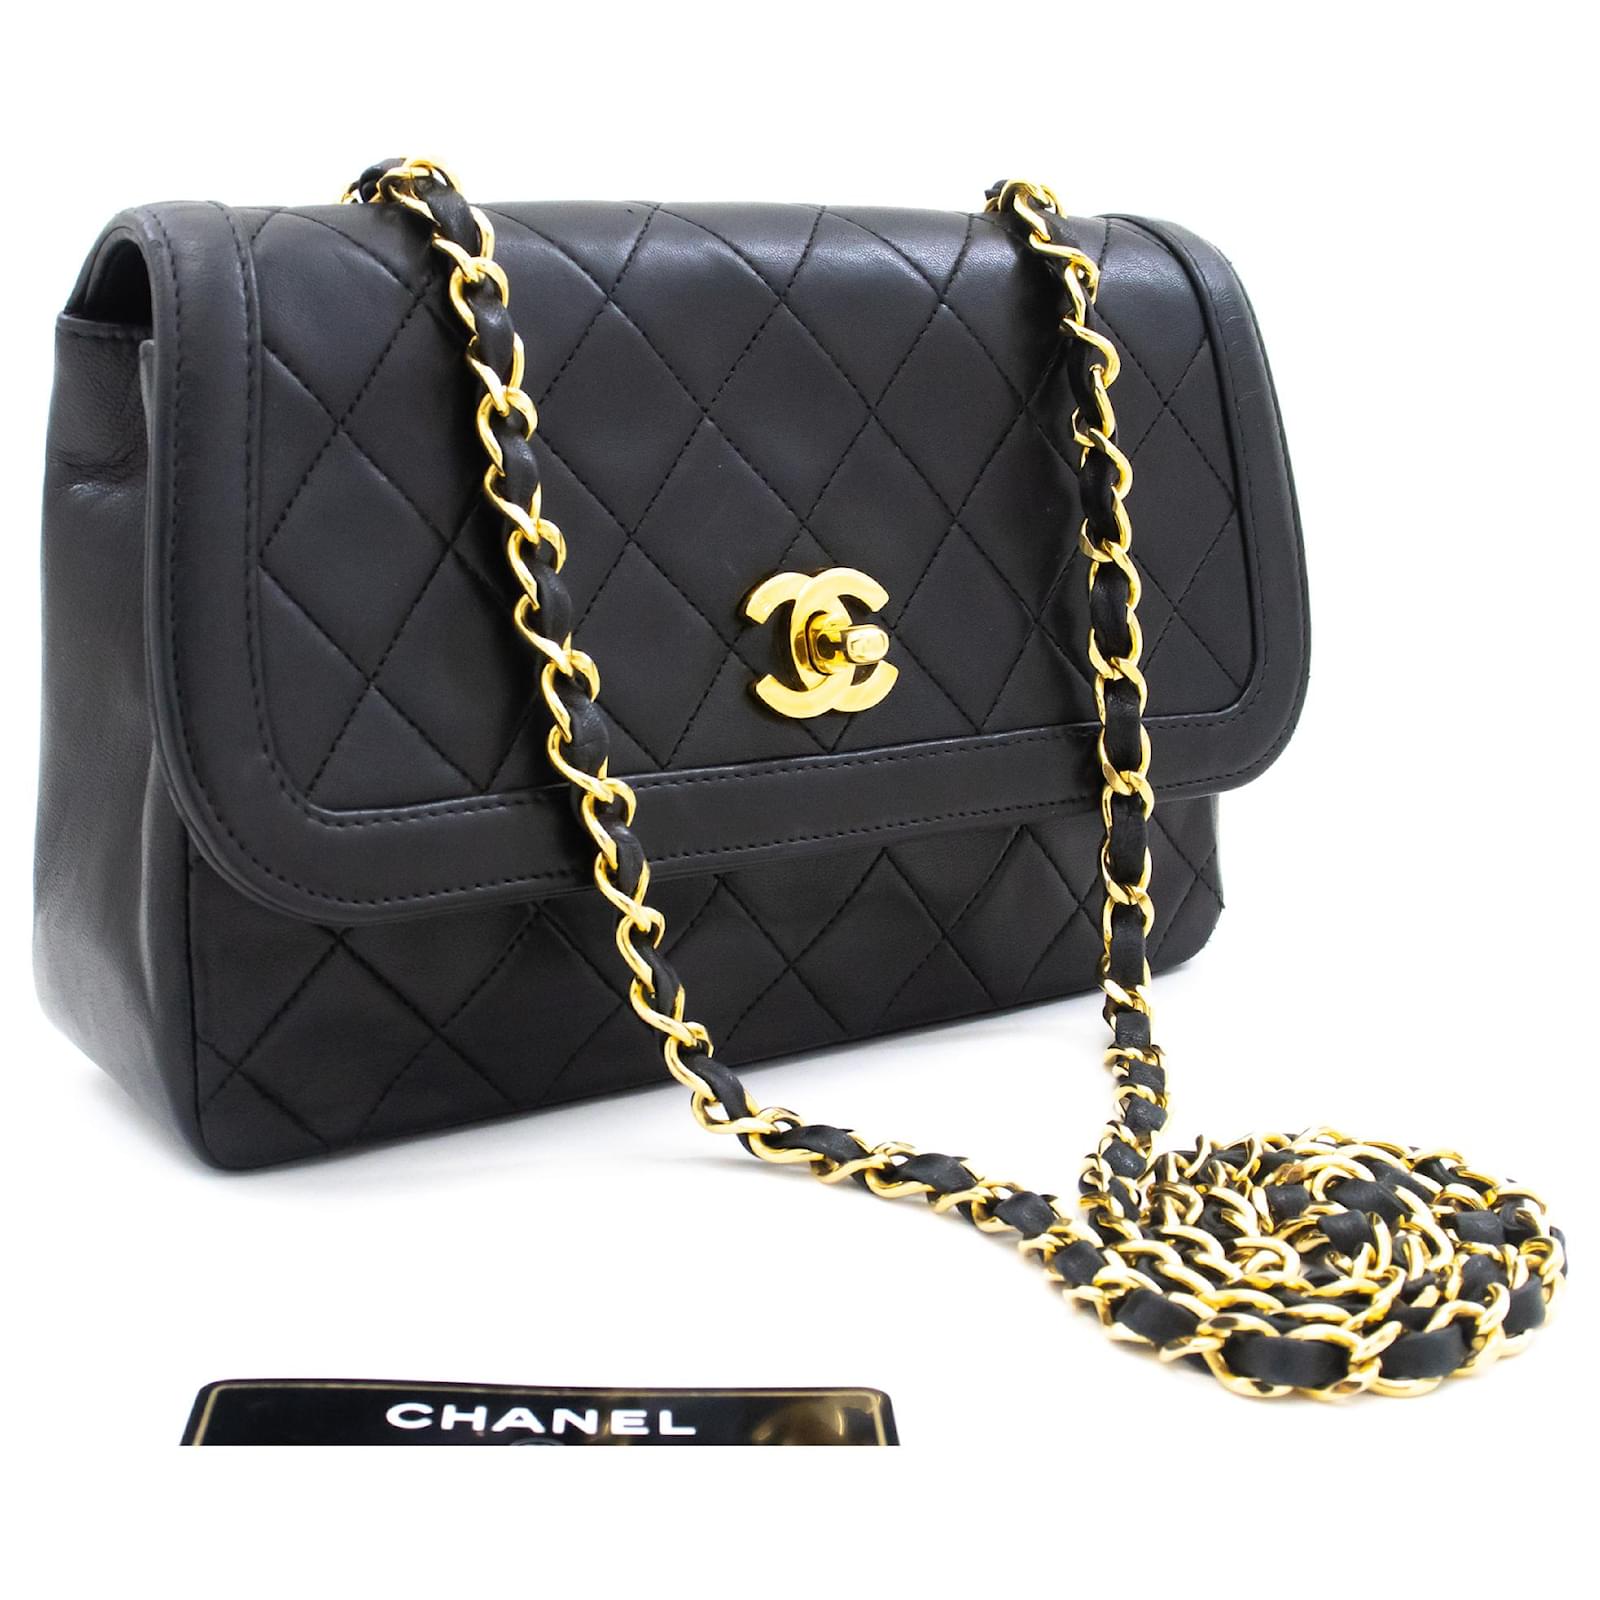 CHANEL - 1980s Small Classic Black Quilted Leather Flap Shoulder Bag /  Crossbody